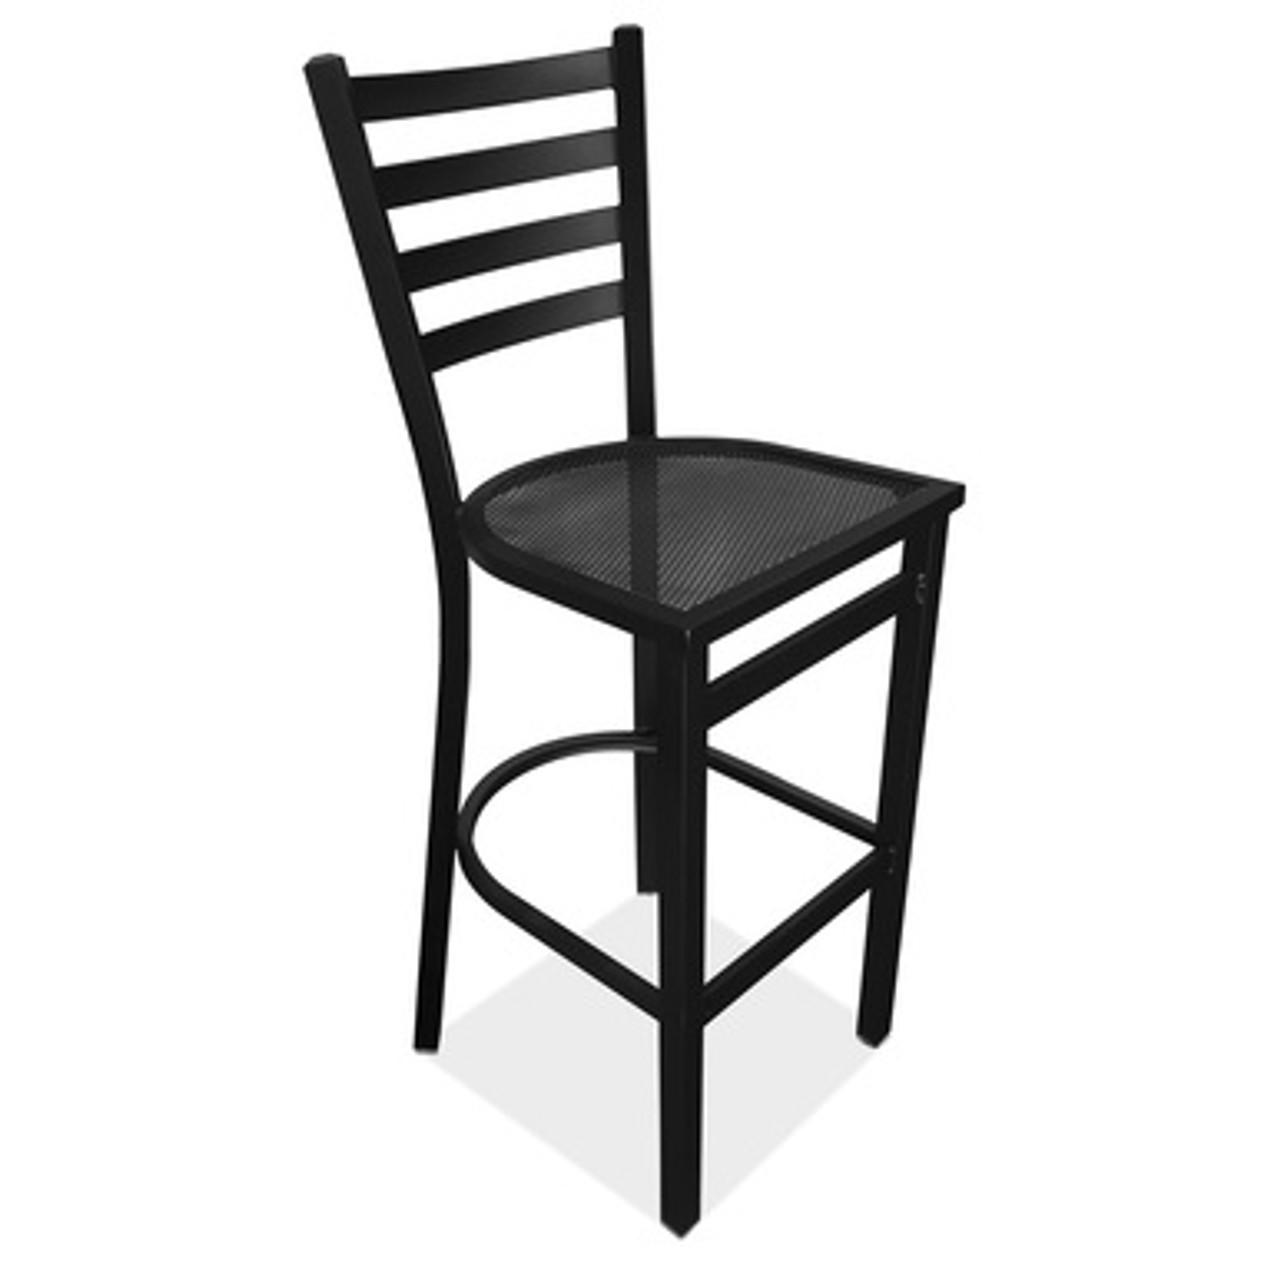  Office Source Robust Collection Heavy Duty Outdoor Bar Stool OD40030 